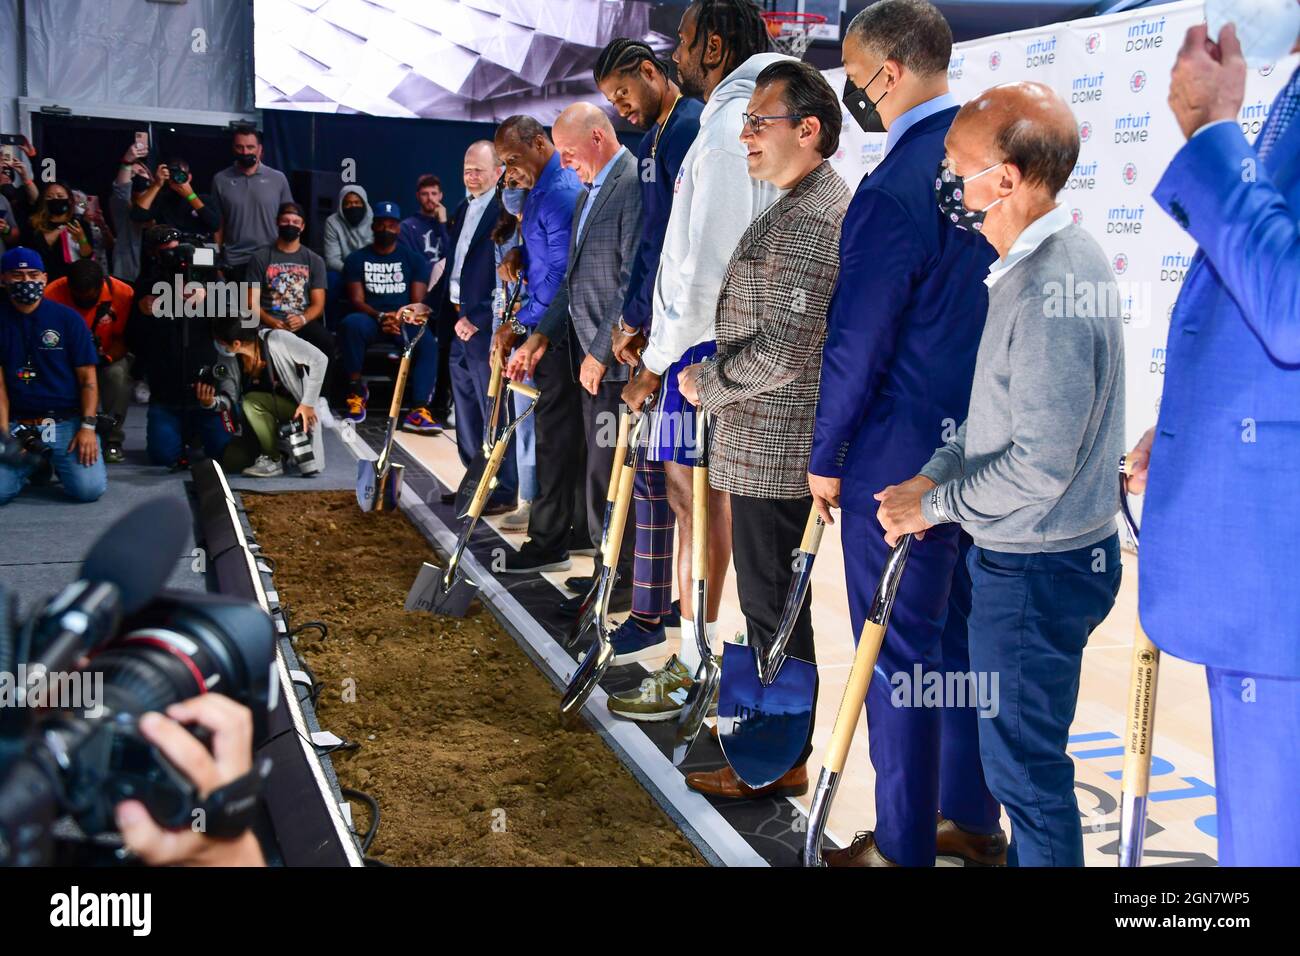 Los Angeles Clippers owner Steve Ballmer, Intuit CEO Sasan Goodarzi, Kawhi Leonard and Paul George, head coach Tyronn Lue, Inglewood Mayor James Butts, Jerry West, Gillian Zucker break ground during a groundbreaking ceremony for the new home of the Los Angeles Clippers, Intuit Dome, Friday, Sept. 17, 2021, in Inglewood, Calif. (Dylan Stewart/Image of Sport/Sipa USA) Stock Photo